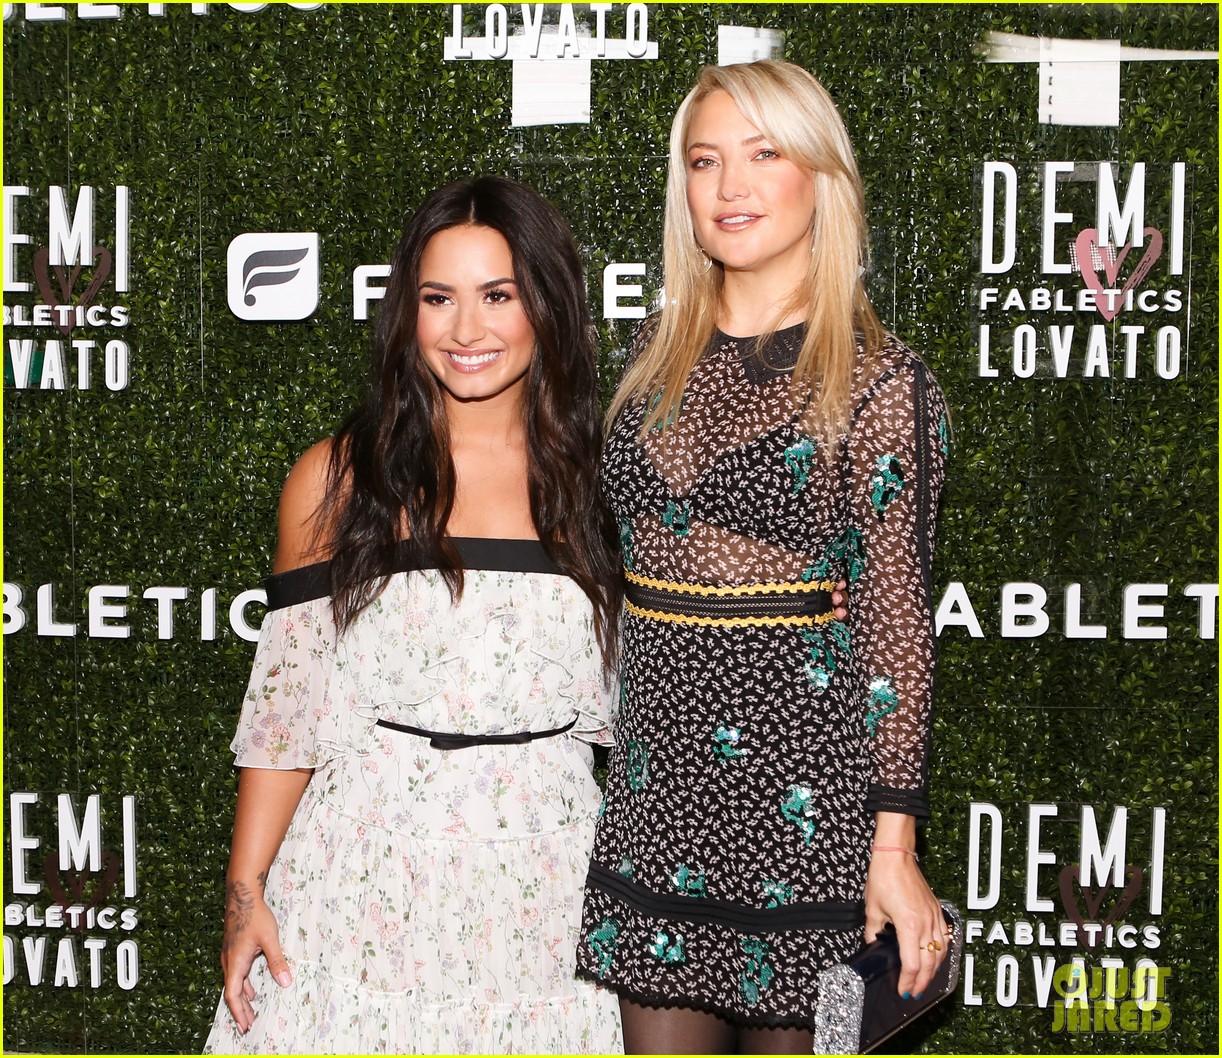 demi lovato celebrates the launch of her fabletics collection01